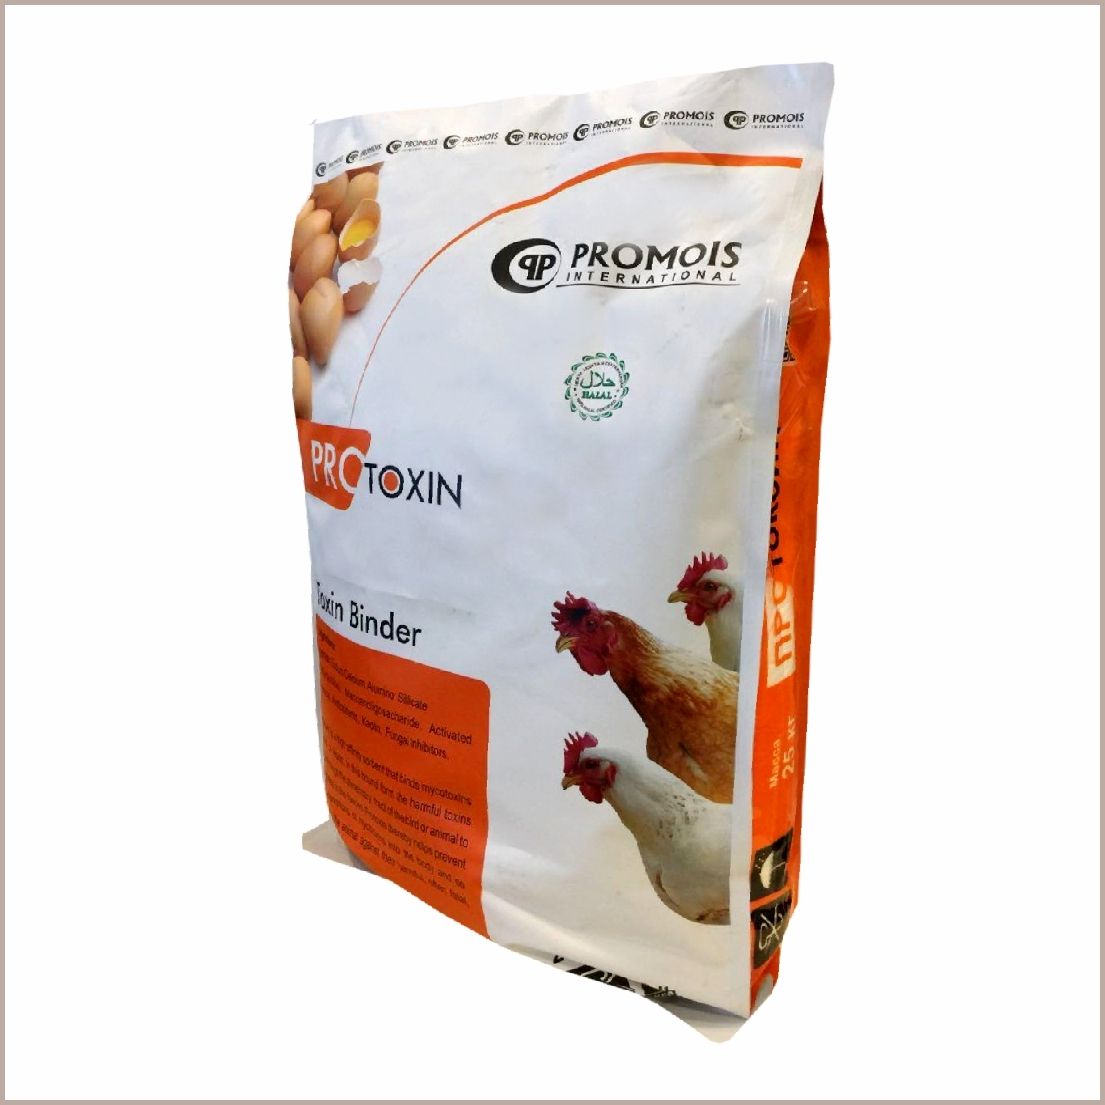 Toxin Binder for Poultry